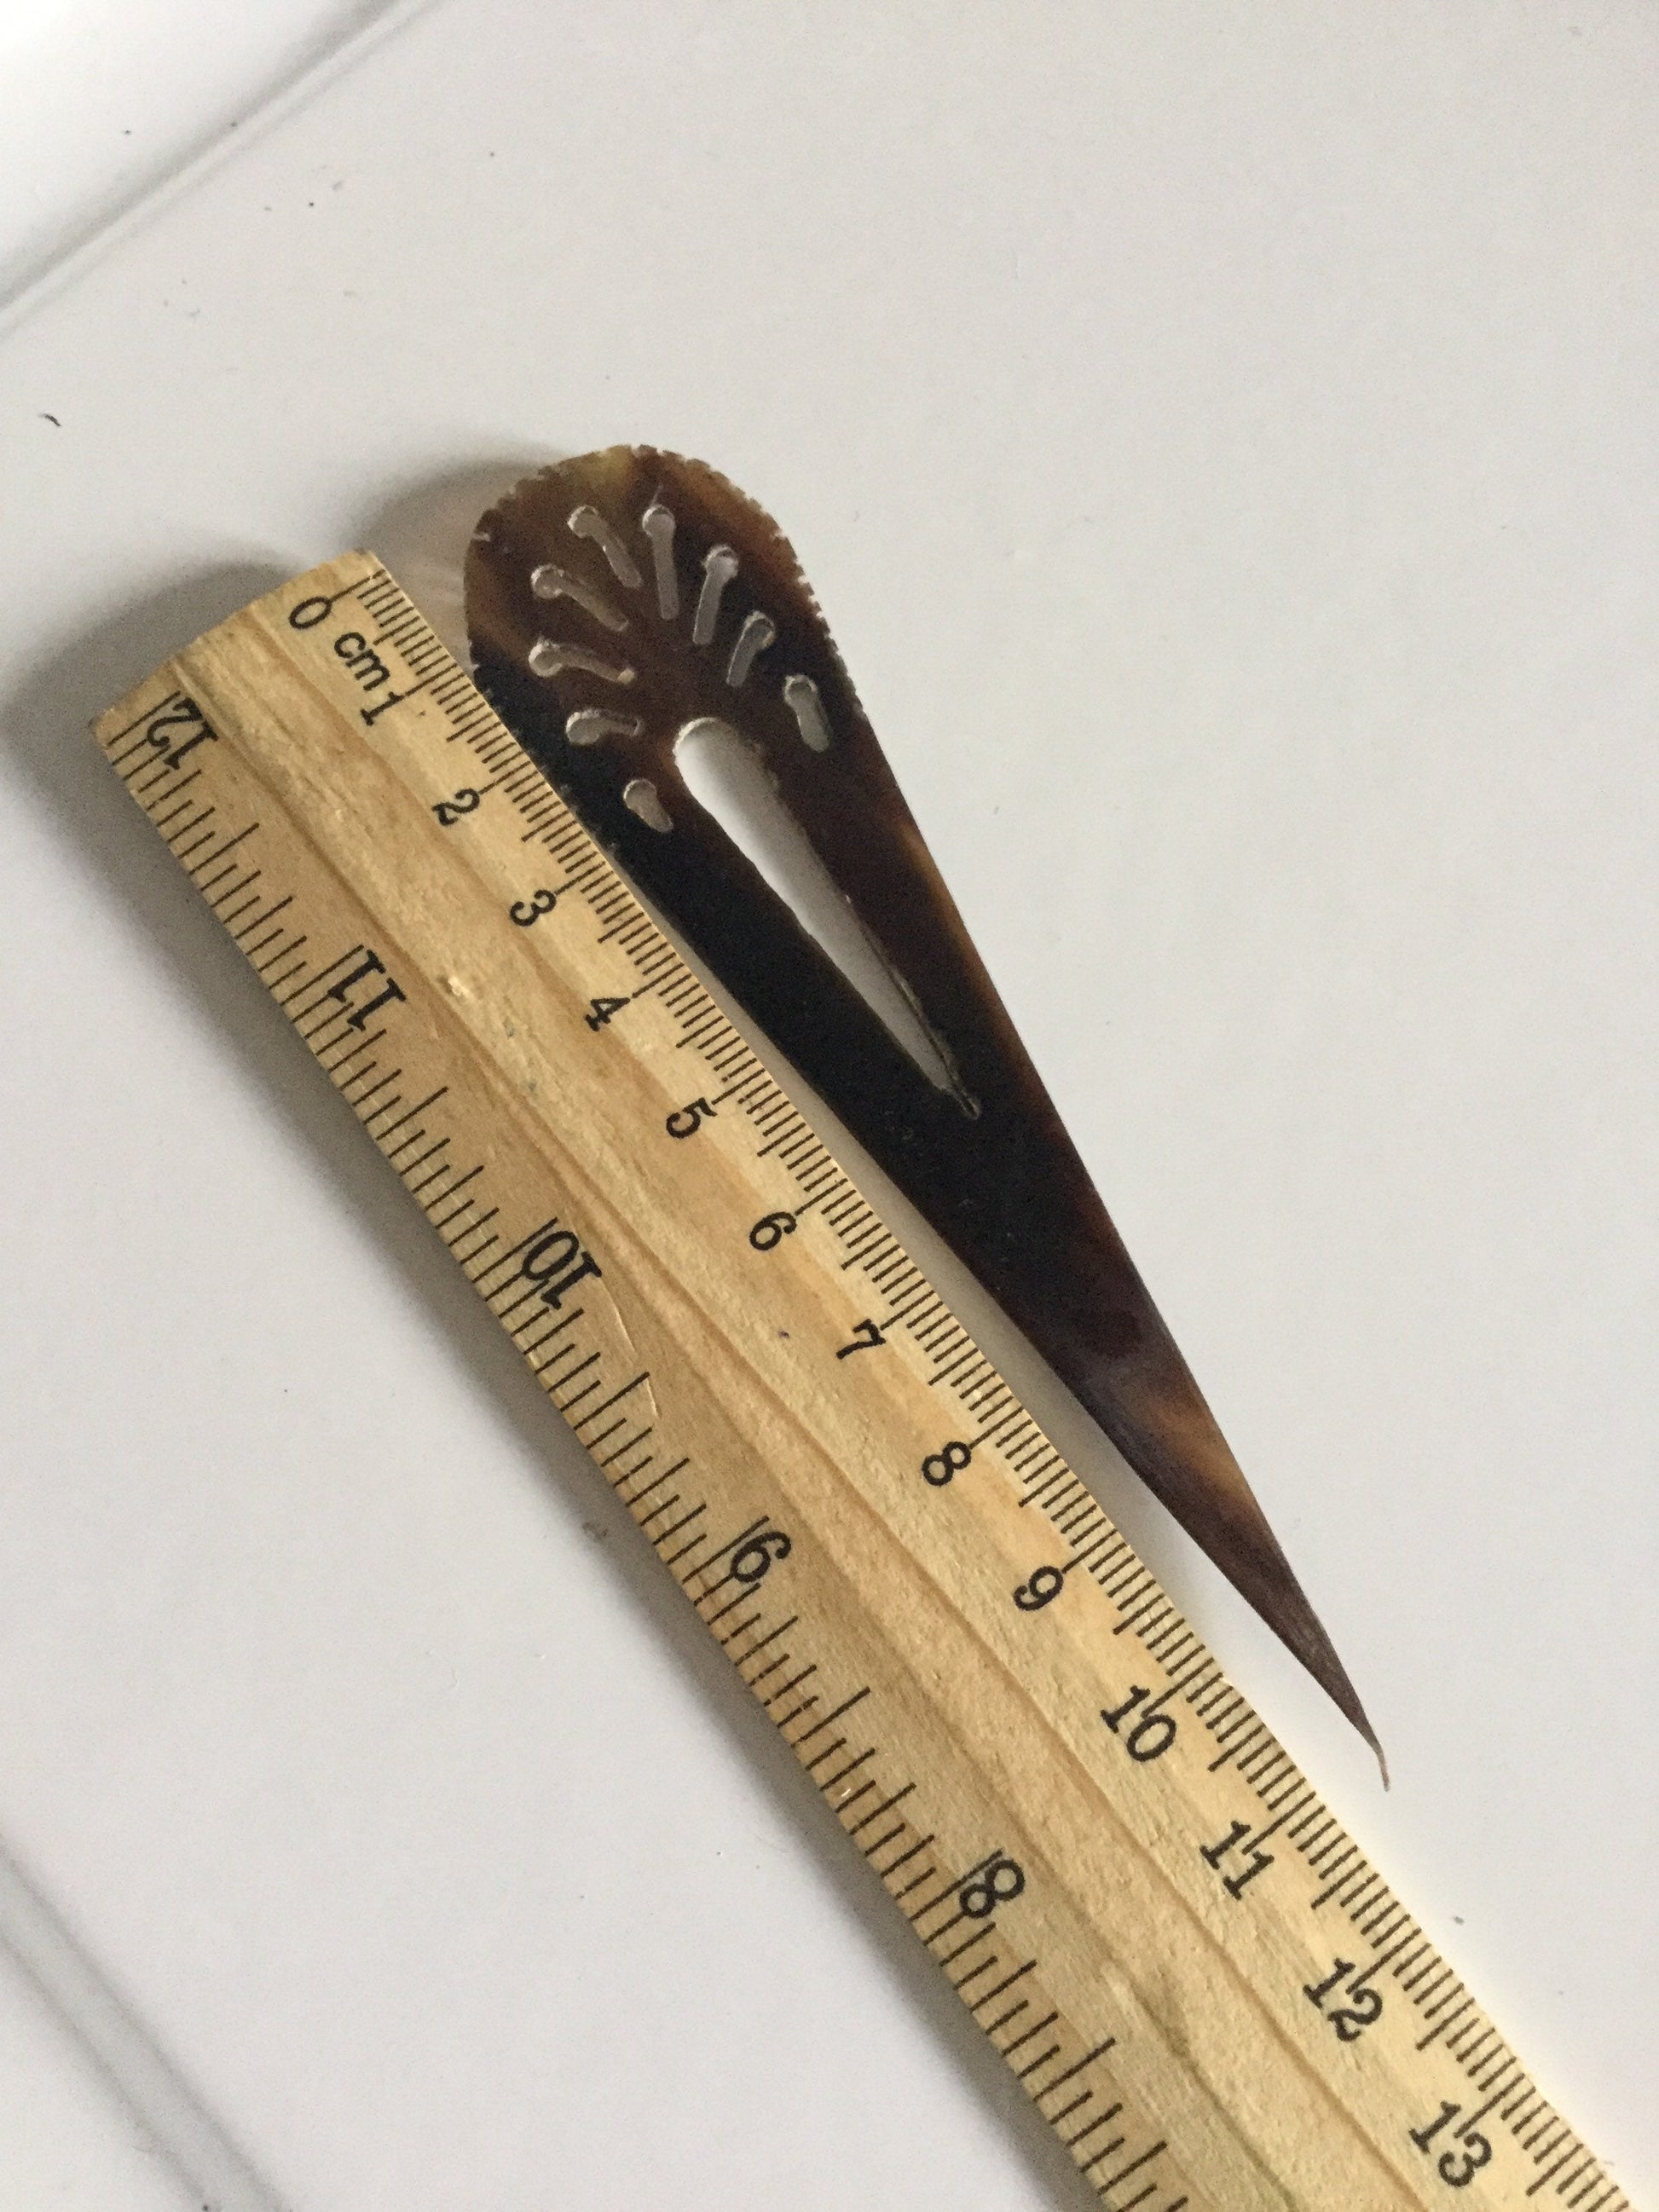 Antique Vintage Edwardian French Bone or Horn or faux tortoiseshell Hair comb grip 1 prong